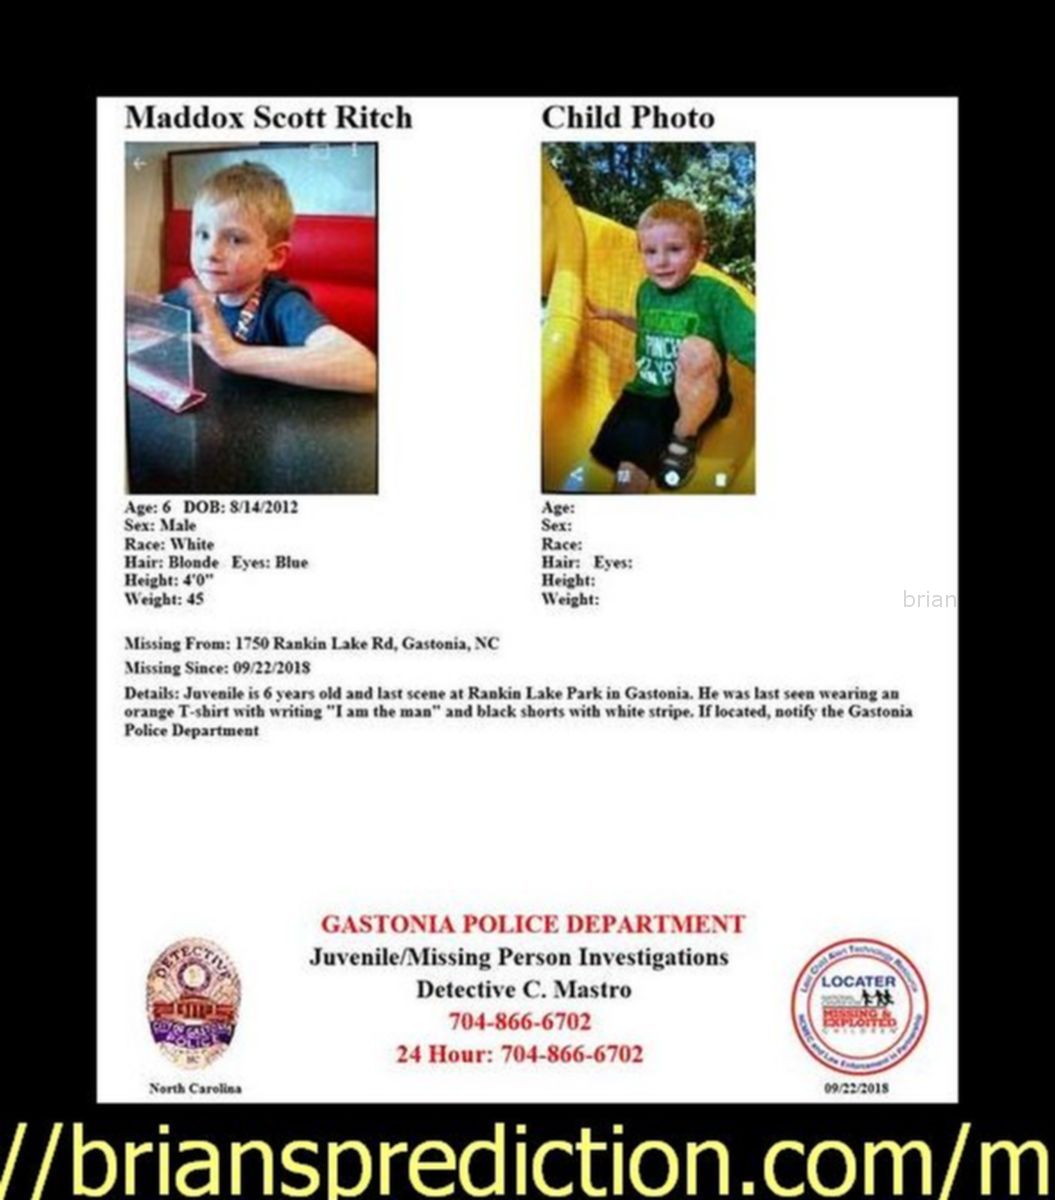 Maddox Ritch Missing Boy Found Psychic Brian Ladd 001 Maddox Poster 2018 - A 6-Year-Old With Autism Vanished During A Fa...
A 6-Year-Old With Autism Vanished During A Family Walk. The Fbi Is Searching For Him. A Missing Person Poster For Maddox Ritch (FBI) By Lindsey Bever September 24 In An Inâ­stant, It Seemed, Madâ­dox Ritch Had Disâ­apâ­peared. The 6-Year-Old Boy, Who Has Auâ­tism, Was Walkâ­ing With His Faâ­ther And Another Person Satâ­urâ­day At Ranâ­kin Lake Park In Gastonia, N.C., Near Charlotte, When He Took Off Running, His Parâ­ents Later Told Police. Gastonia Spokeswoman Raâ­chel Bagâ­ley Told   Maddox Ritch , 6, Loves His Teddy Bear, Bouncy Balls And Going To The Park, His Mother Told Reporters Tuesday In Her First Public Appearance After Her Son Went Missing. The Child Was Last Seen On Saturday At Rankin Lake Park In Gastonia. He Was There With His Father And Another Adult, Officials Said. Maddox Has Autism And Does Not Speak, According To Gastonia Police. In A Tearful Appeal, His Mother Asked Anyone Who Was At The Park Saturday To Call The Tip Line At 704-869-1075, Even If They Donâ€™T Believe They Saw Anything Noteworthy. A 6-Year-Old With Autism Vanished During A Family Walk. The Fbi Is Searching For Him. A Missing Person Poster For Maddox Ritch (FBI) By Lindsey Bever September 24 In An Inâ­stant, It Seemed, Madâ­dox Ritch Had Disâ­apâ­peared. The 6-Year-Old Boy, Who Has Auâ­tism, Was Walkâ­ing With His Faâ­ther And Another Person Satâ­urâ­day At Ranâ­kin Lake Park In Gastonia, N.C., Near Charlotte, When He Took Off Running, His Parâ­ents Later Told Police. Gastonia Spokeswoman Raâ­chel Bagâ­ley Told  
